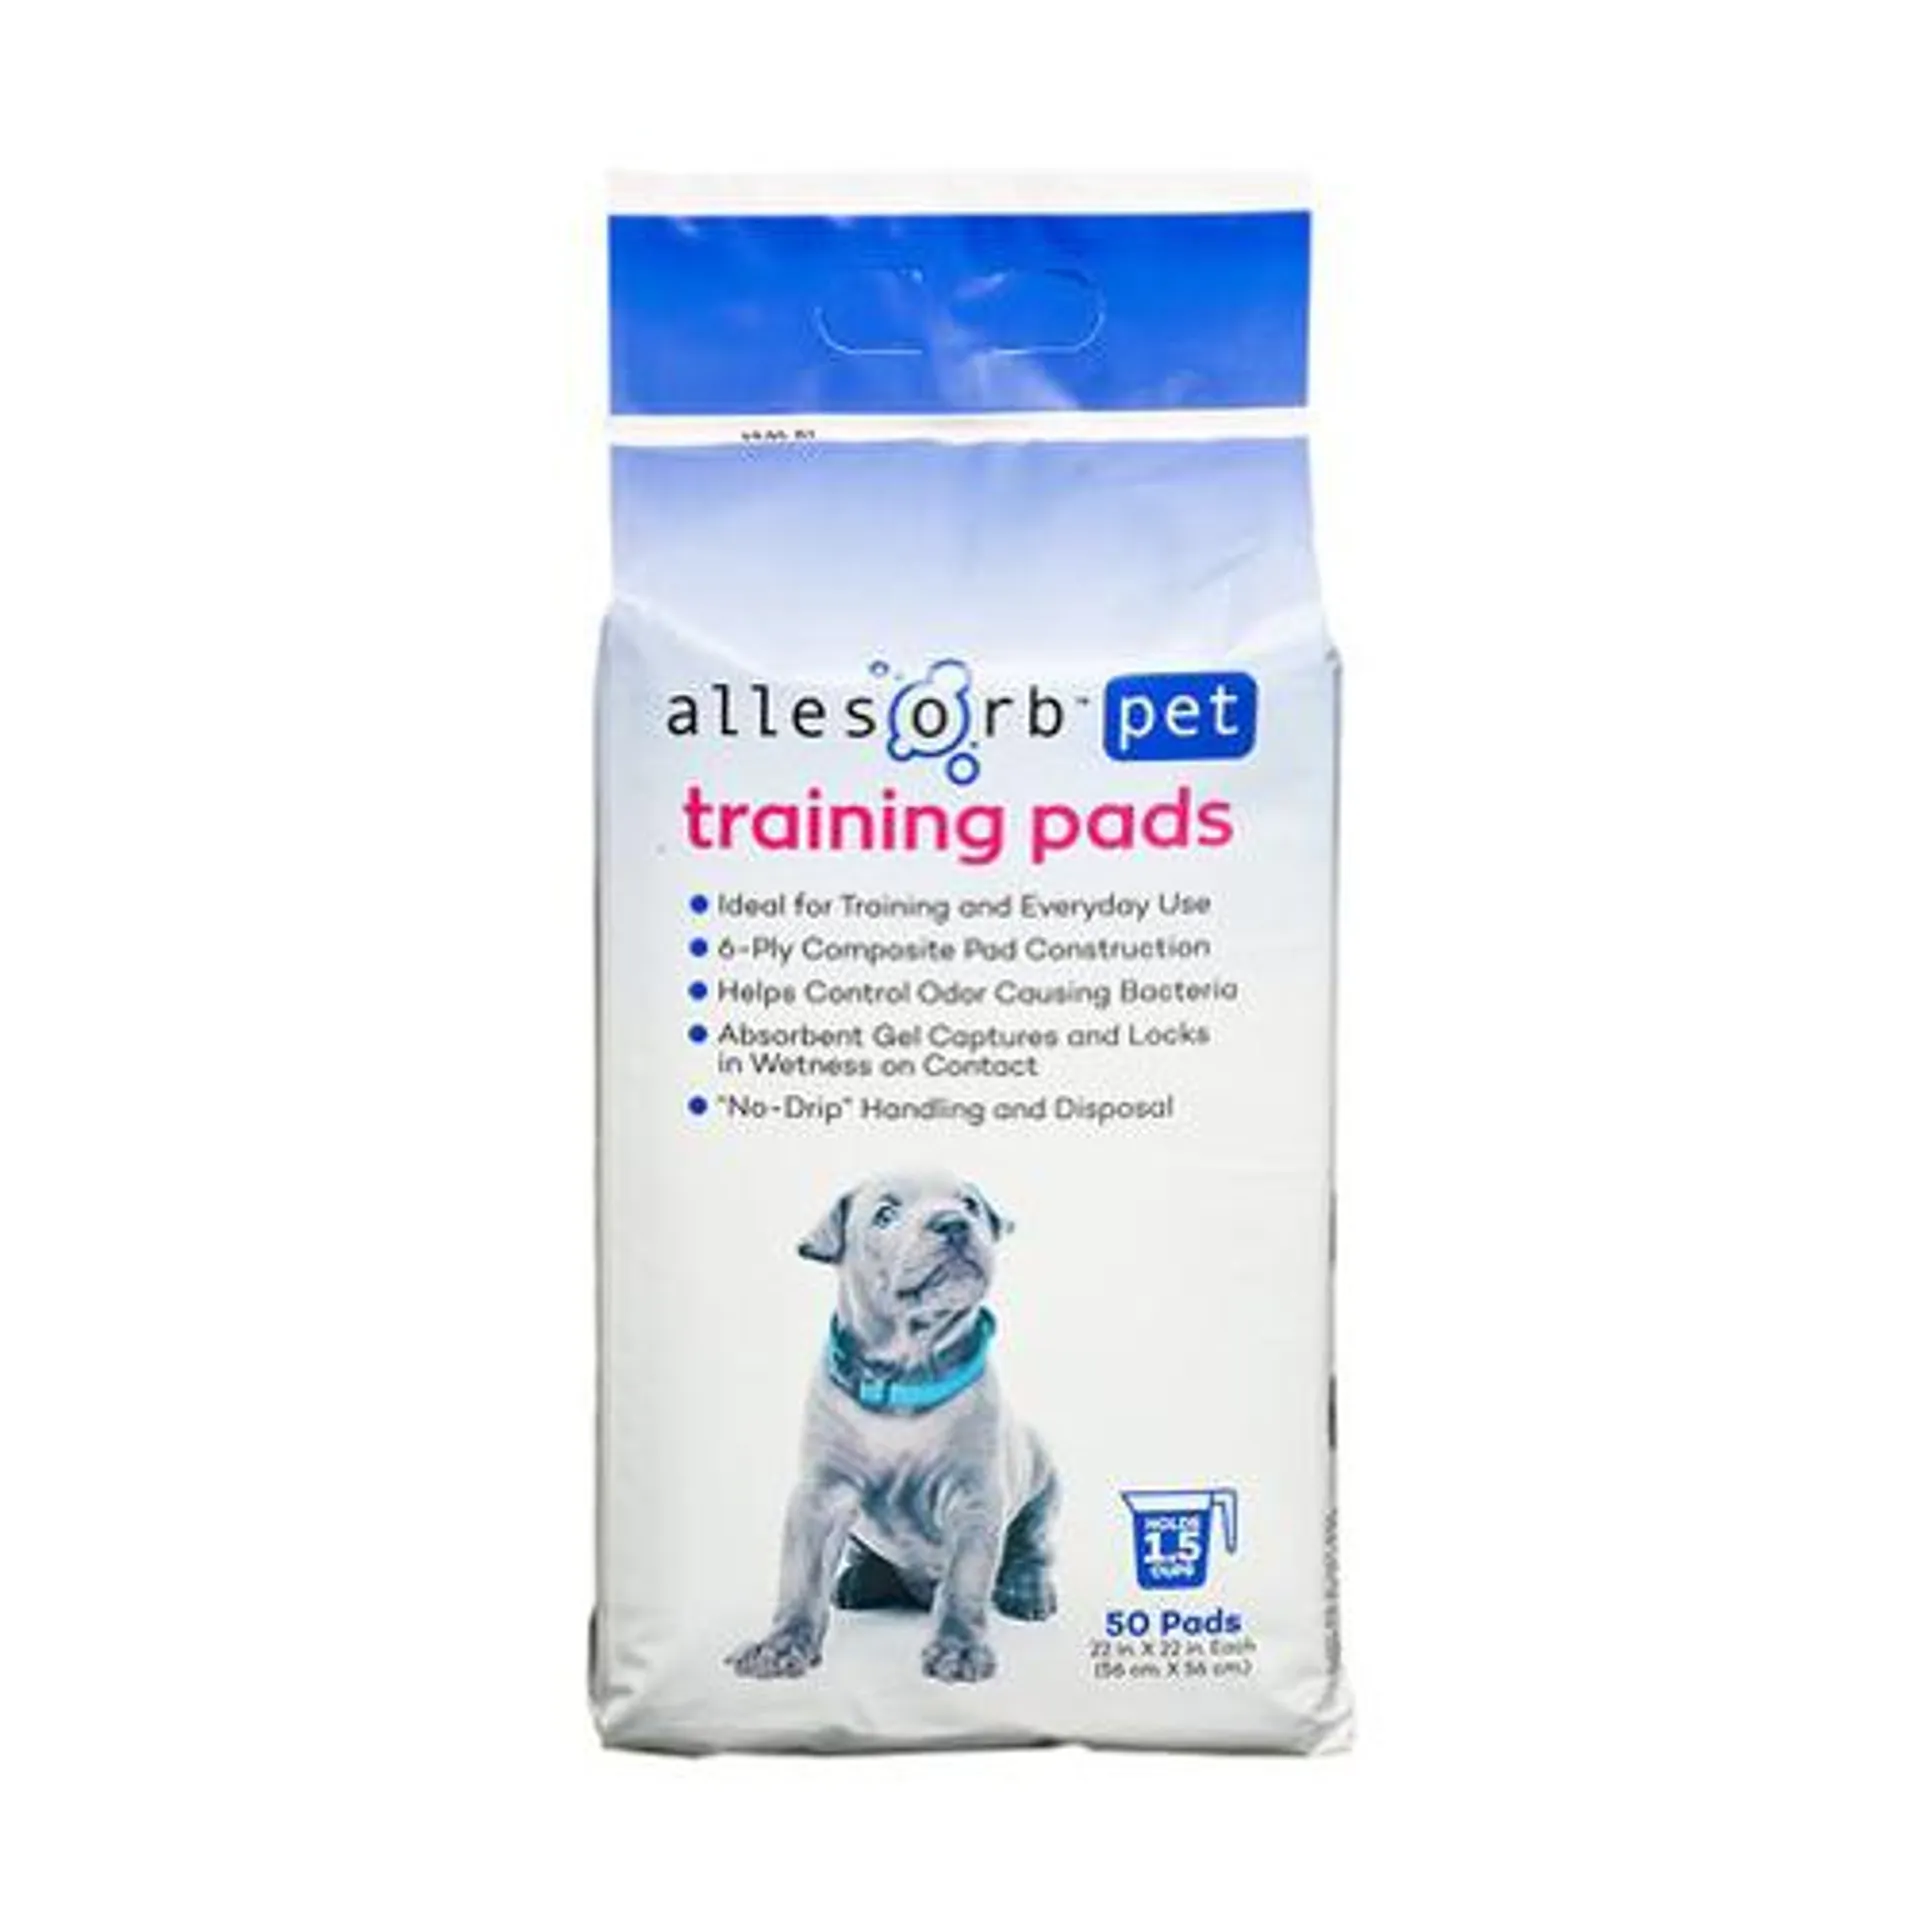 Allesorb Puppy Training Pads - 50 pk